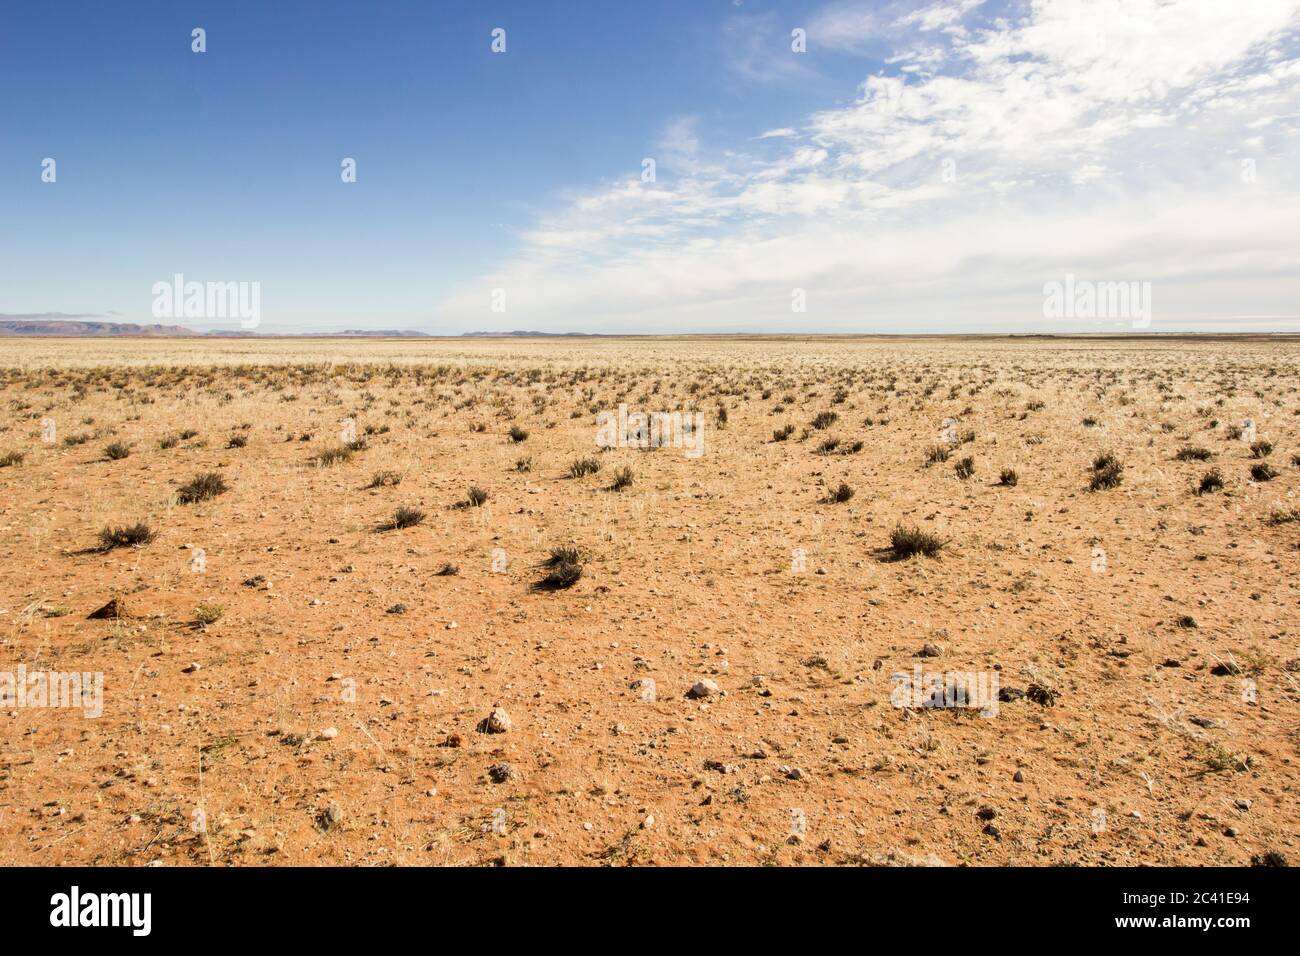 The Xeric Scrubland of the Nama Karoo (Bushman Land), South Africa, during a drought Stock Photo